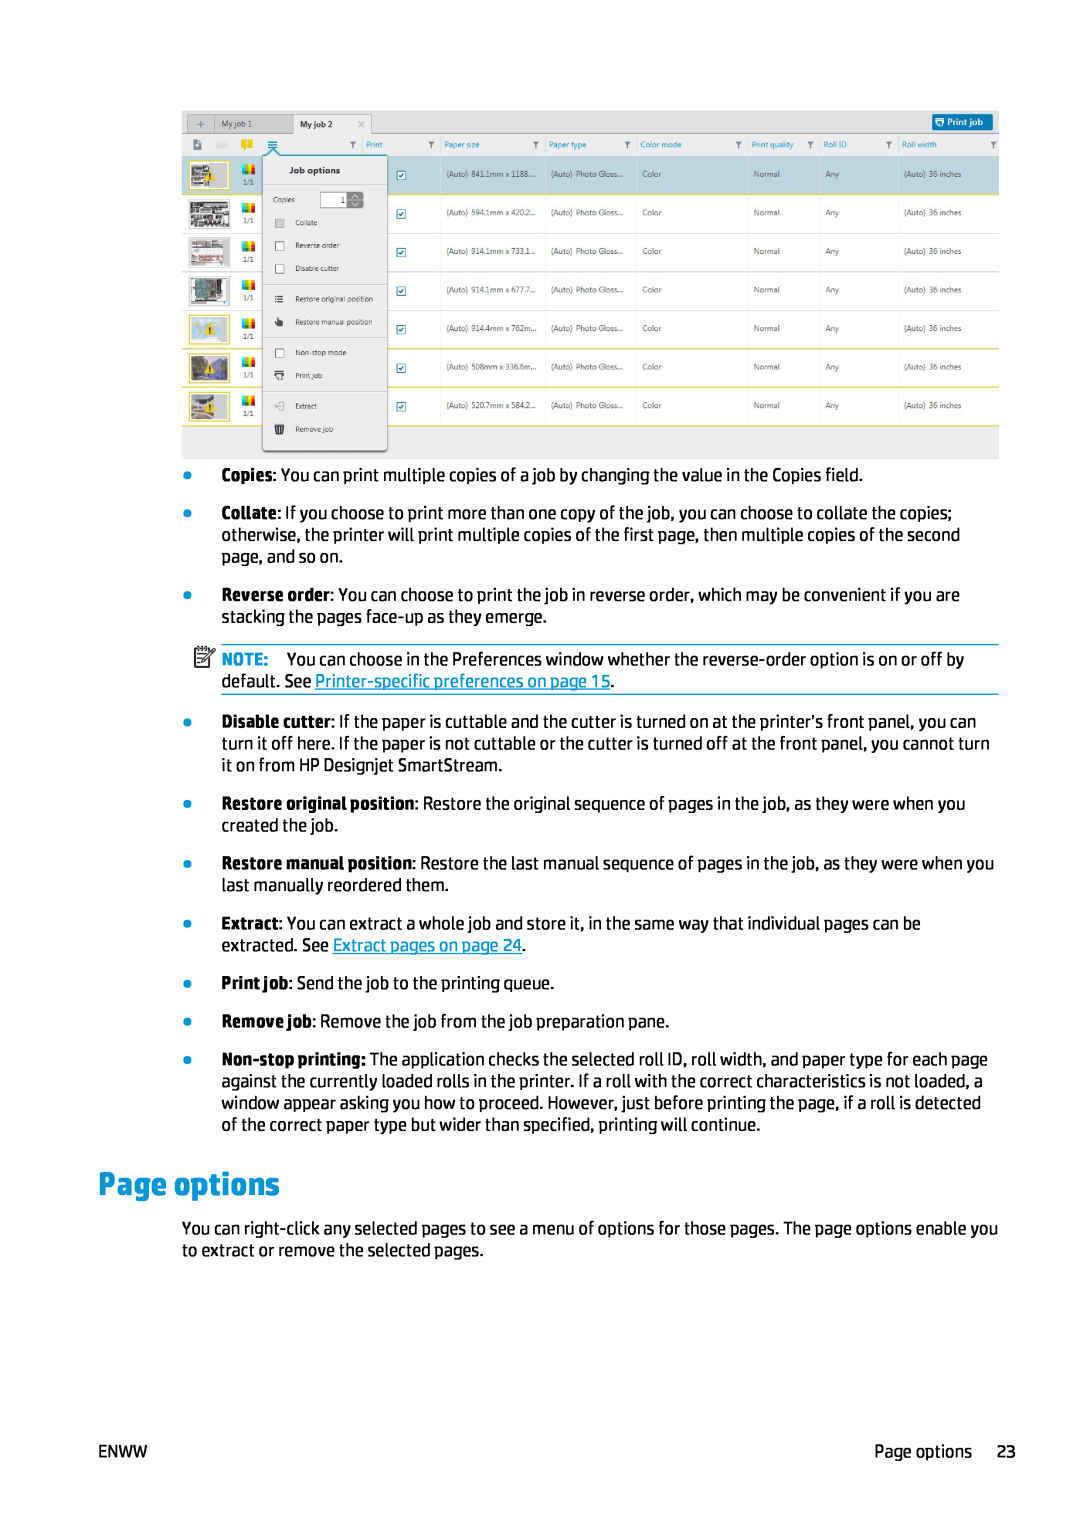 HP SmartStream Software for s manual Page options 